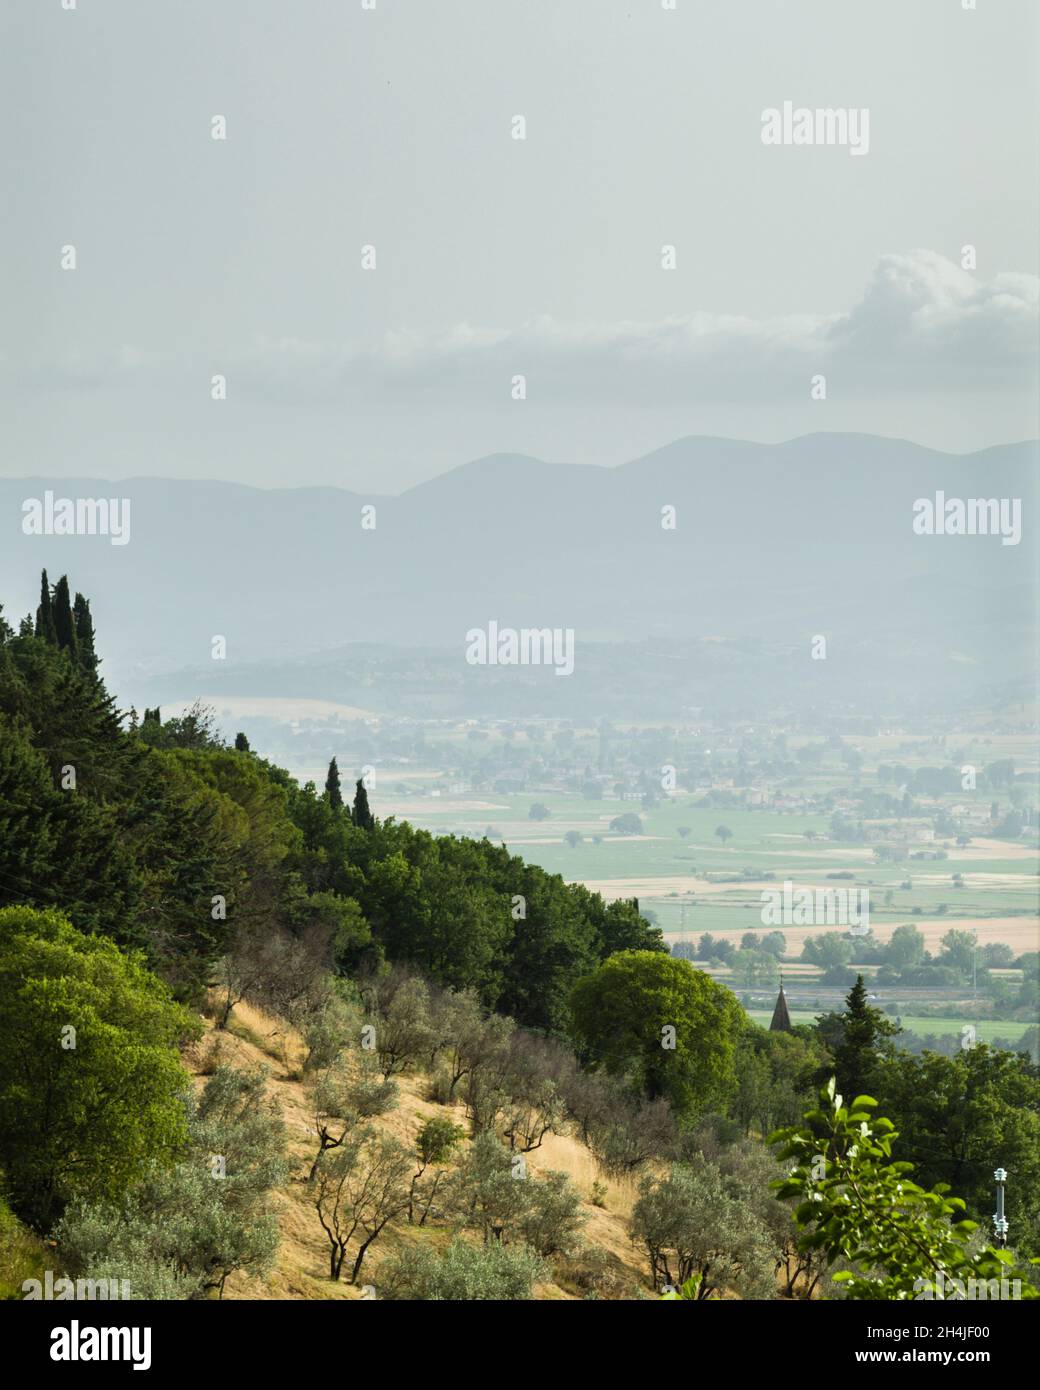 View across the hills over  the Umbrian Valley, near Trevi.  Umbria Italy Stock Photo